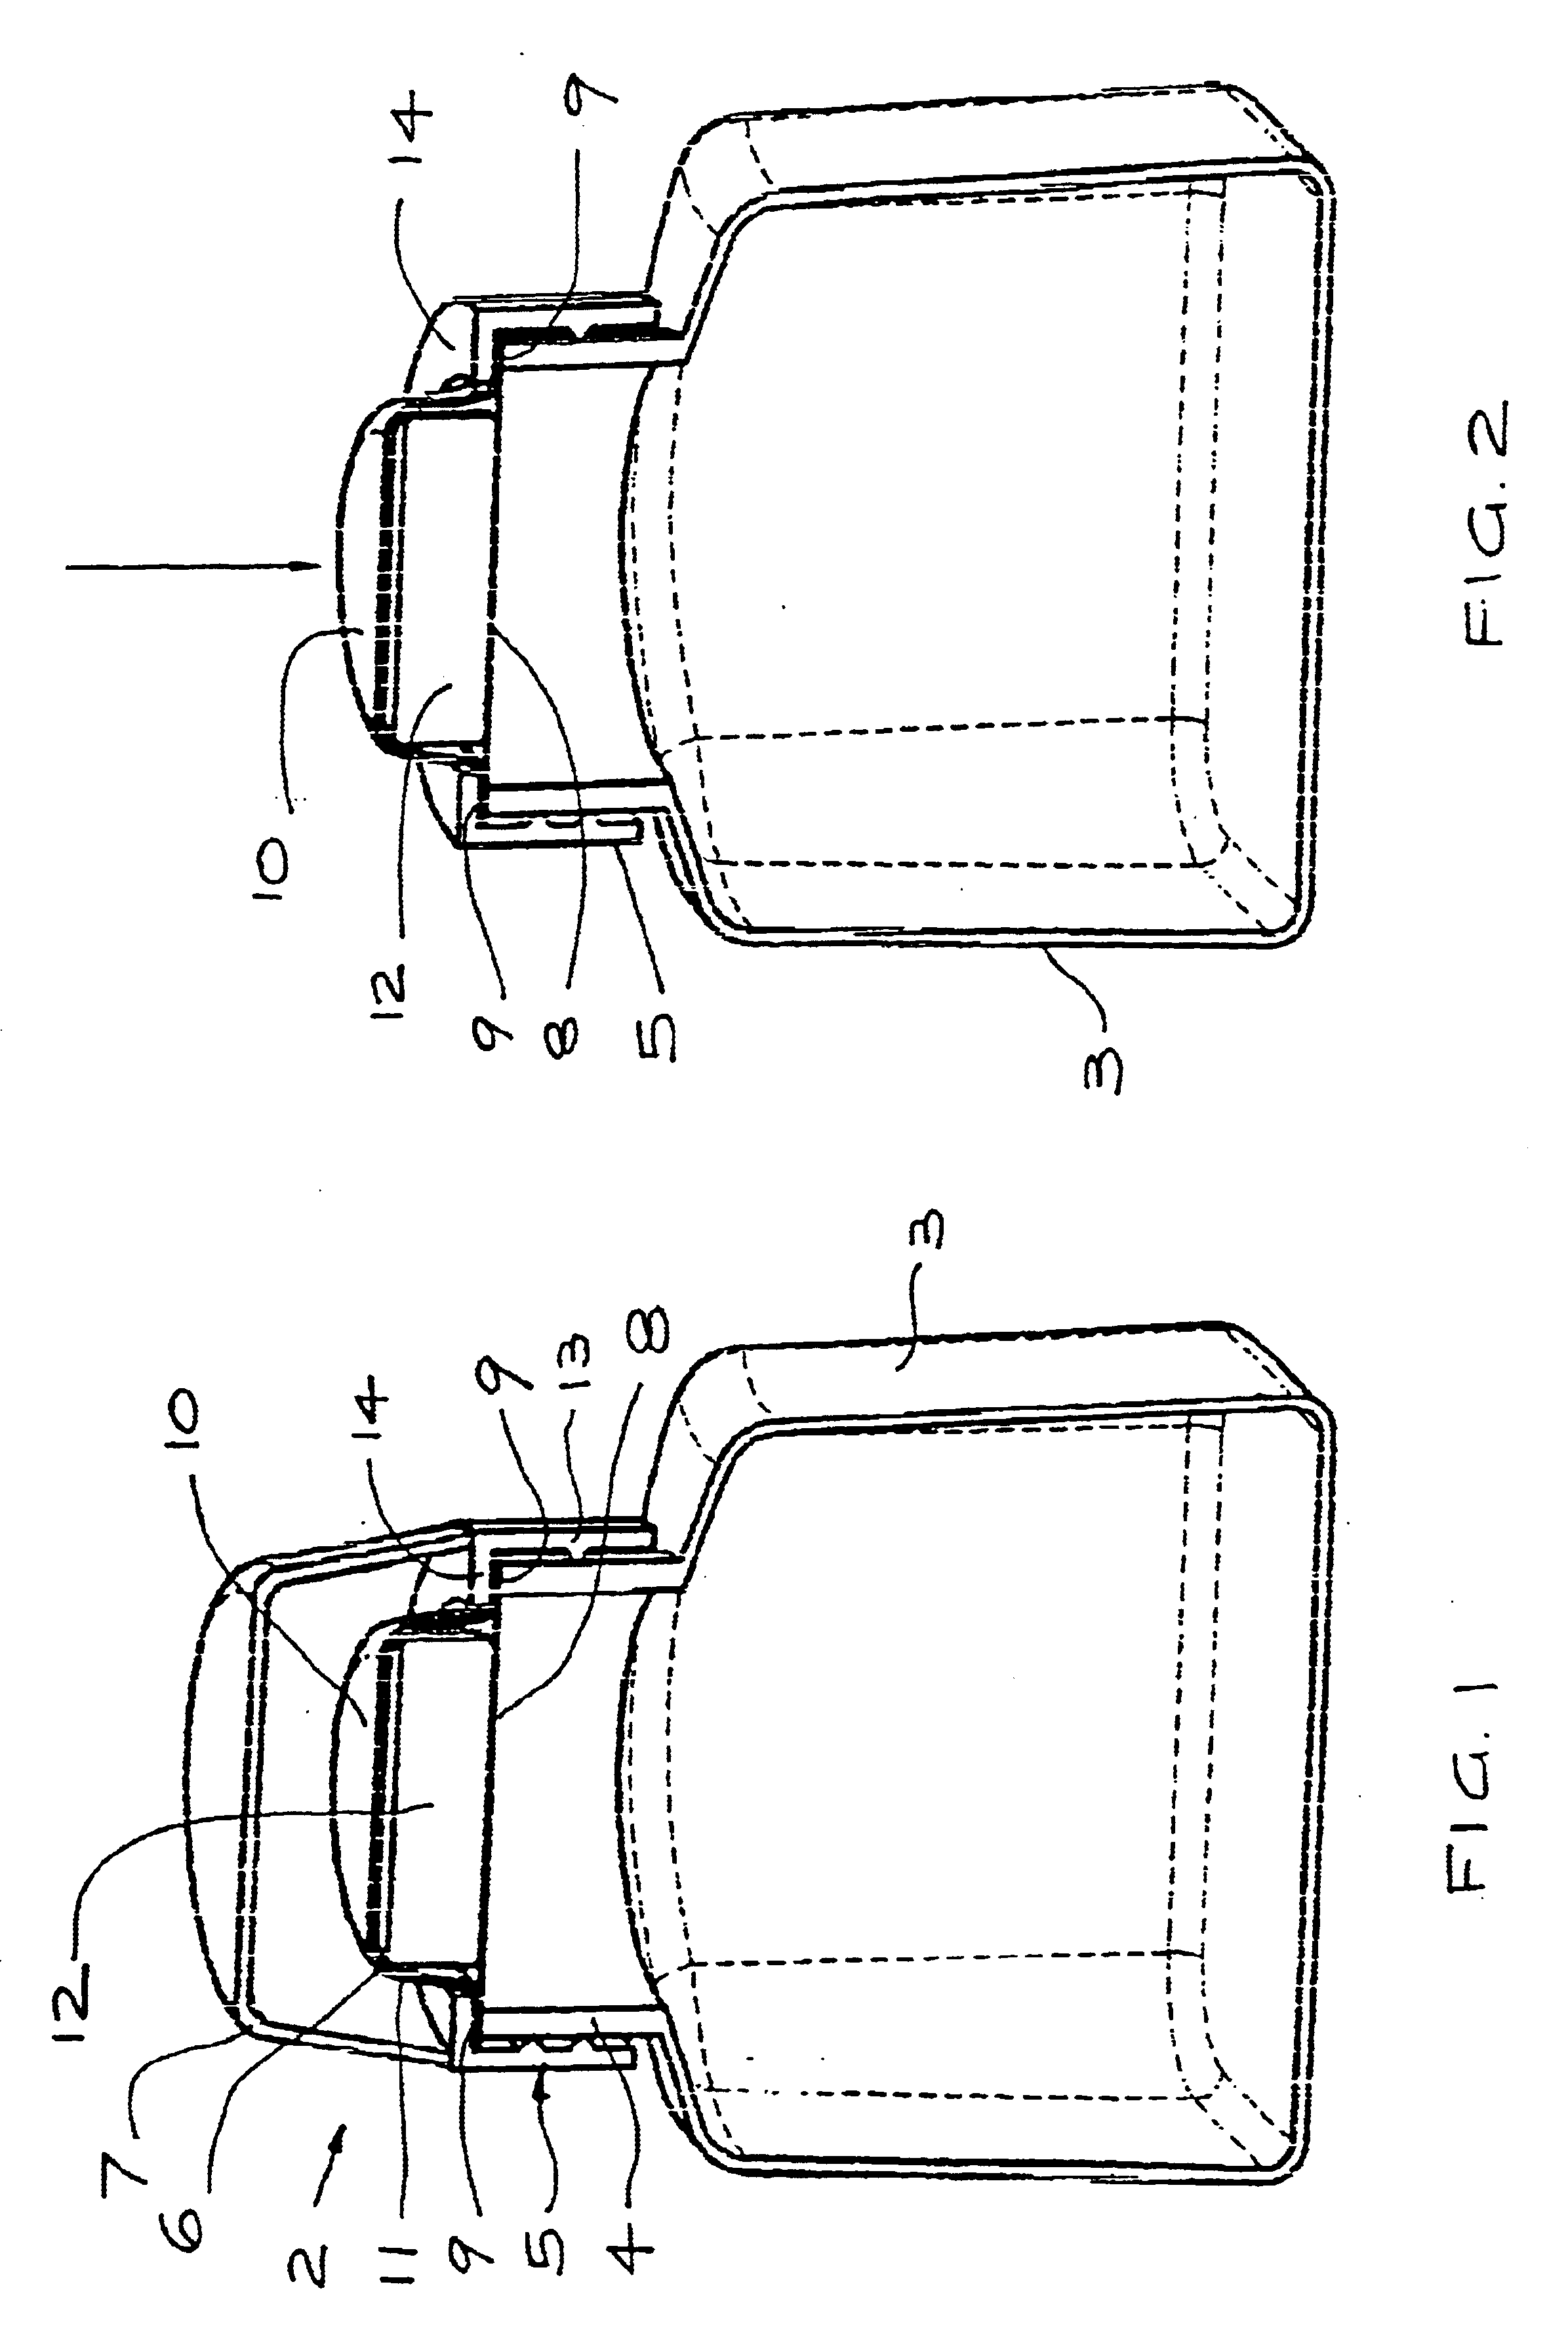 Discharge cap for releasable product